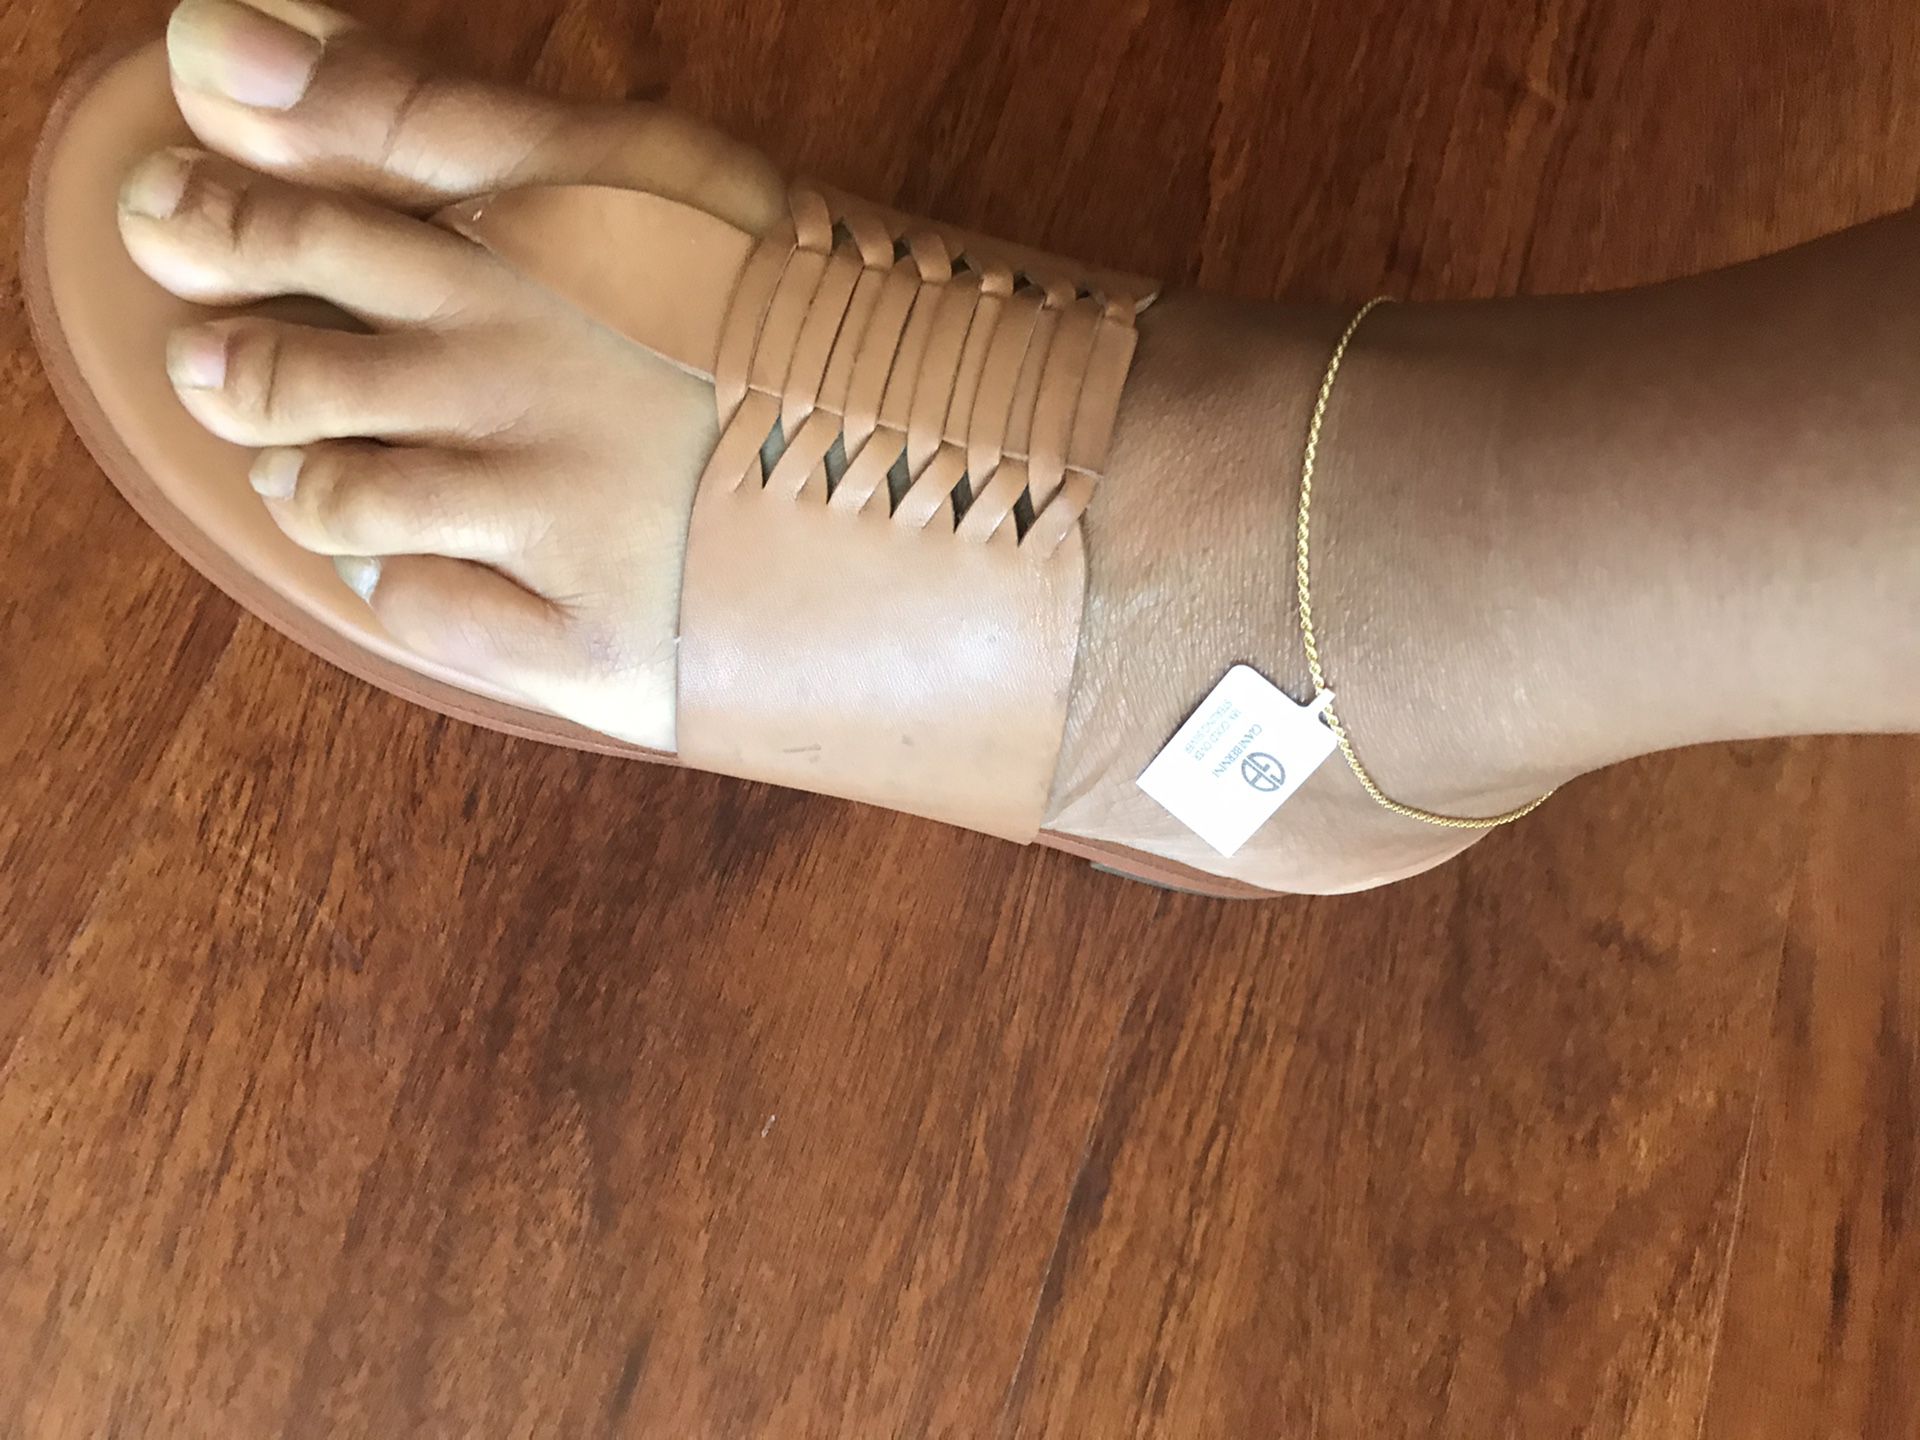 18K over silver anklet. Super cute. New